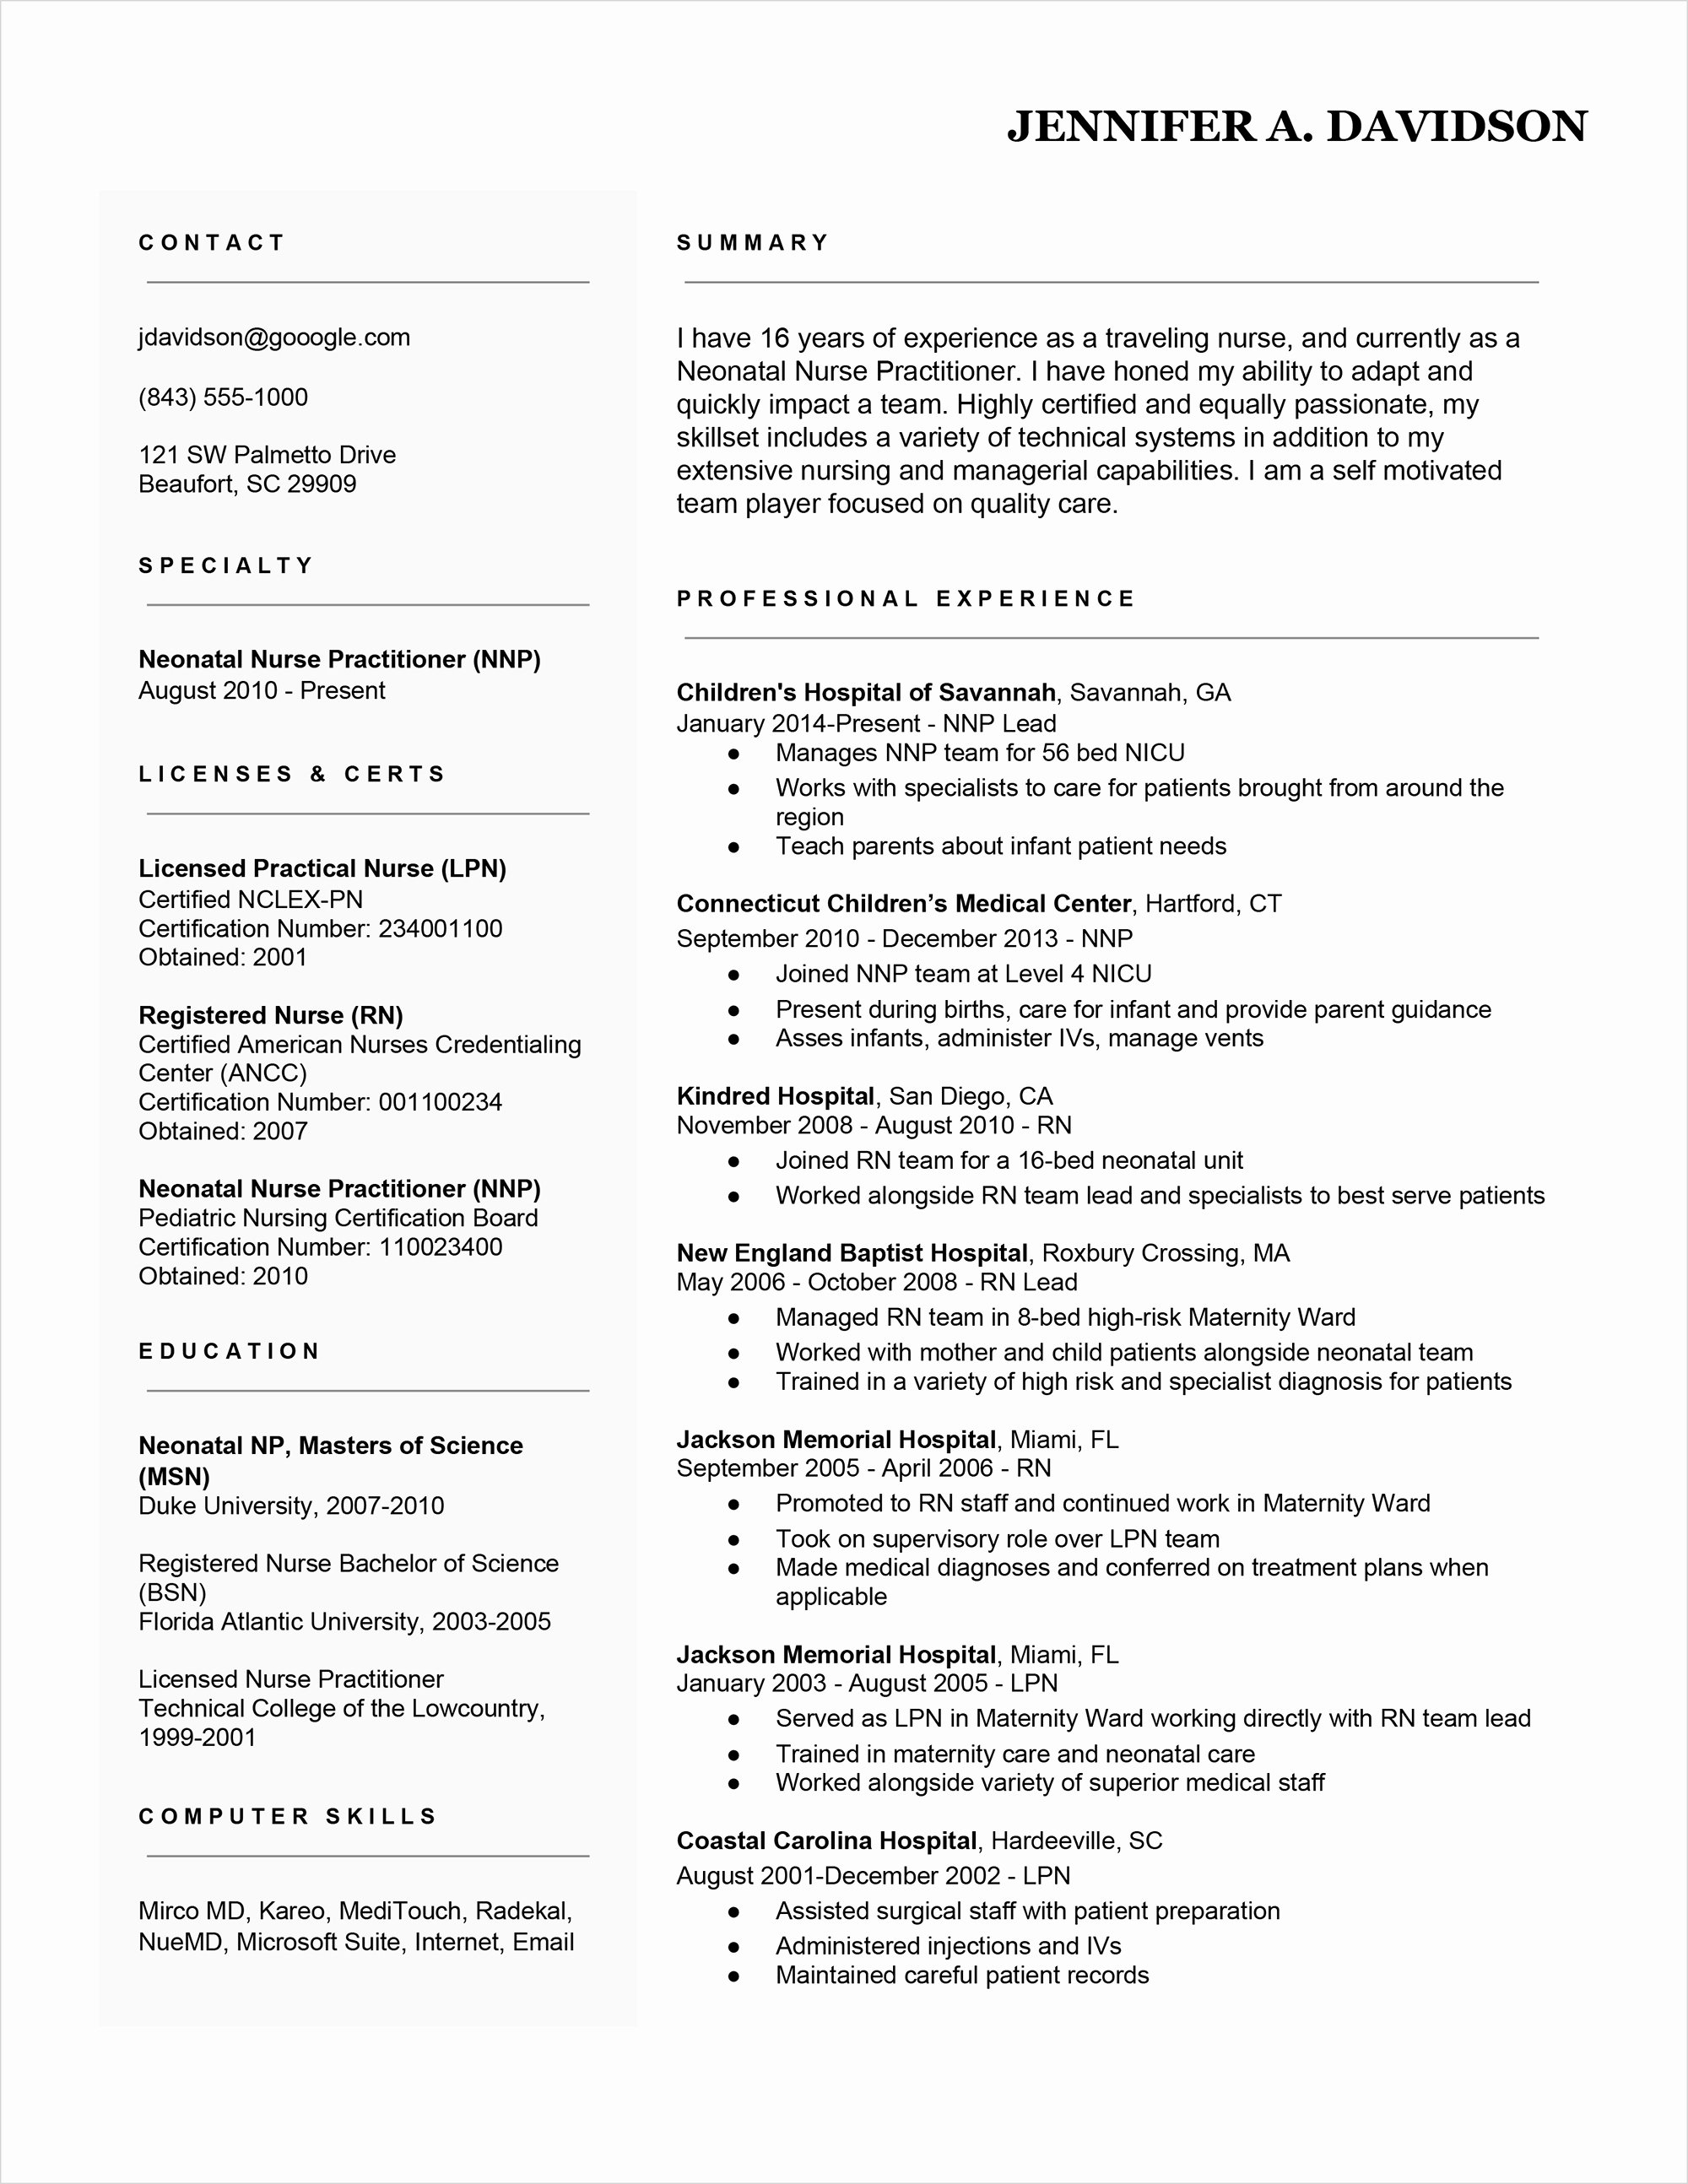 Nursing Student Resume Template New Travel Nurse Resume Examples 7 Secrets for Standing Out